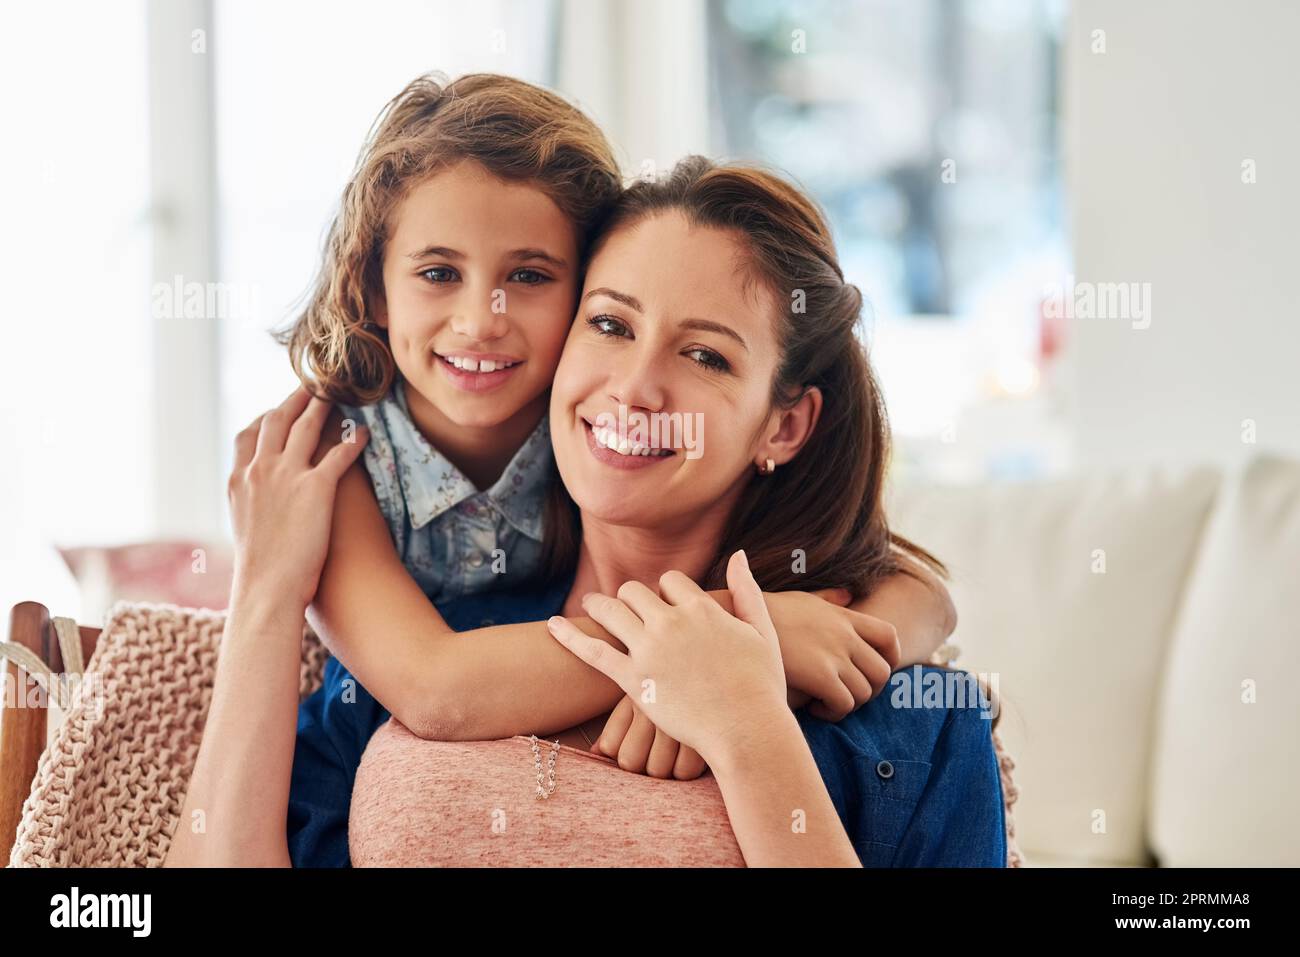 Nothing better than spending time with my best friend ever. Portrait of a mother and daughter spending some quality time together at home. Stock Photo